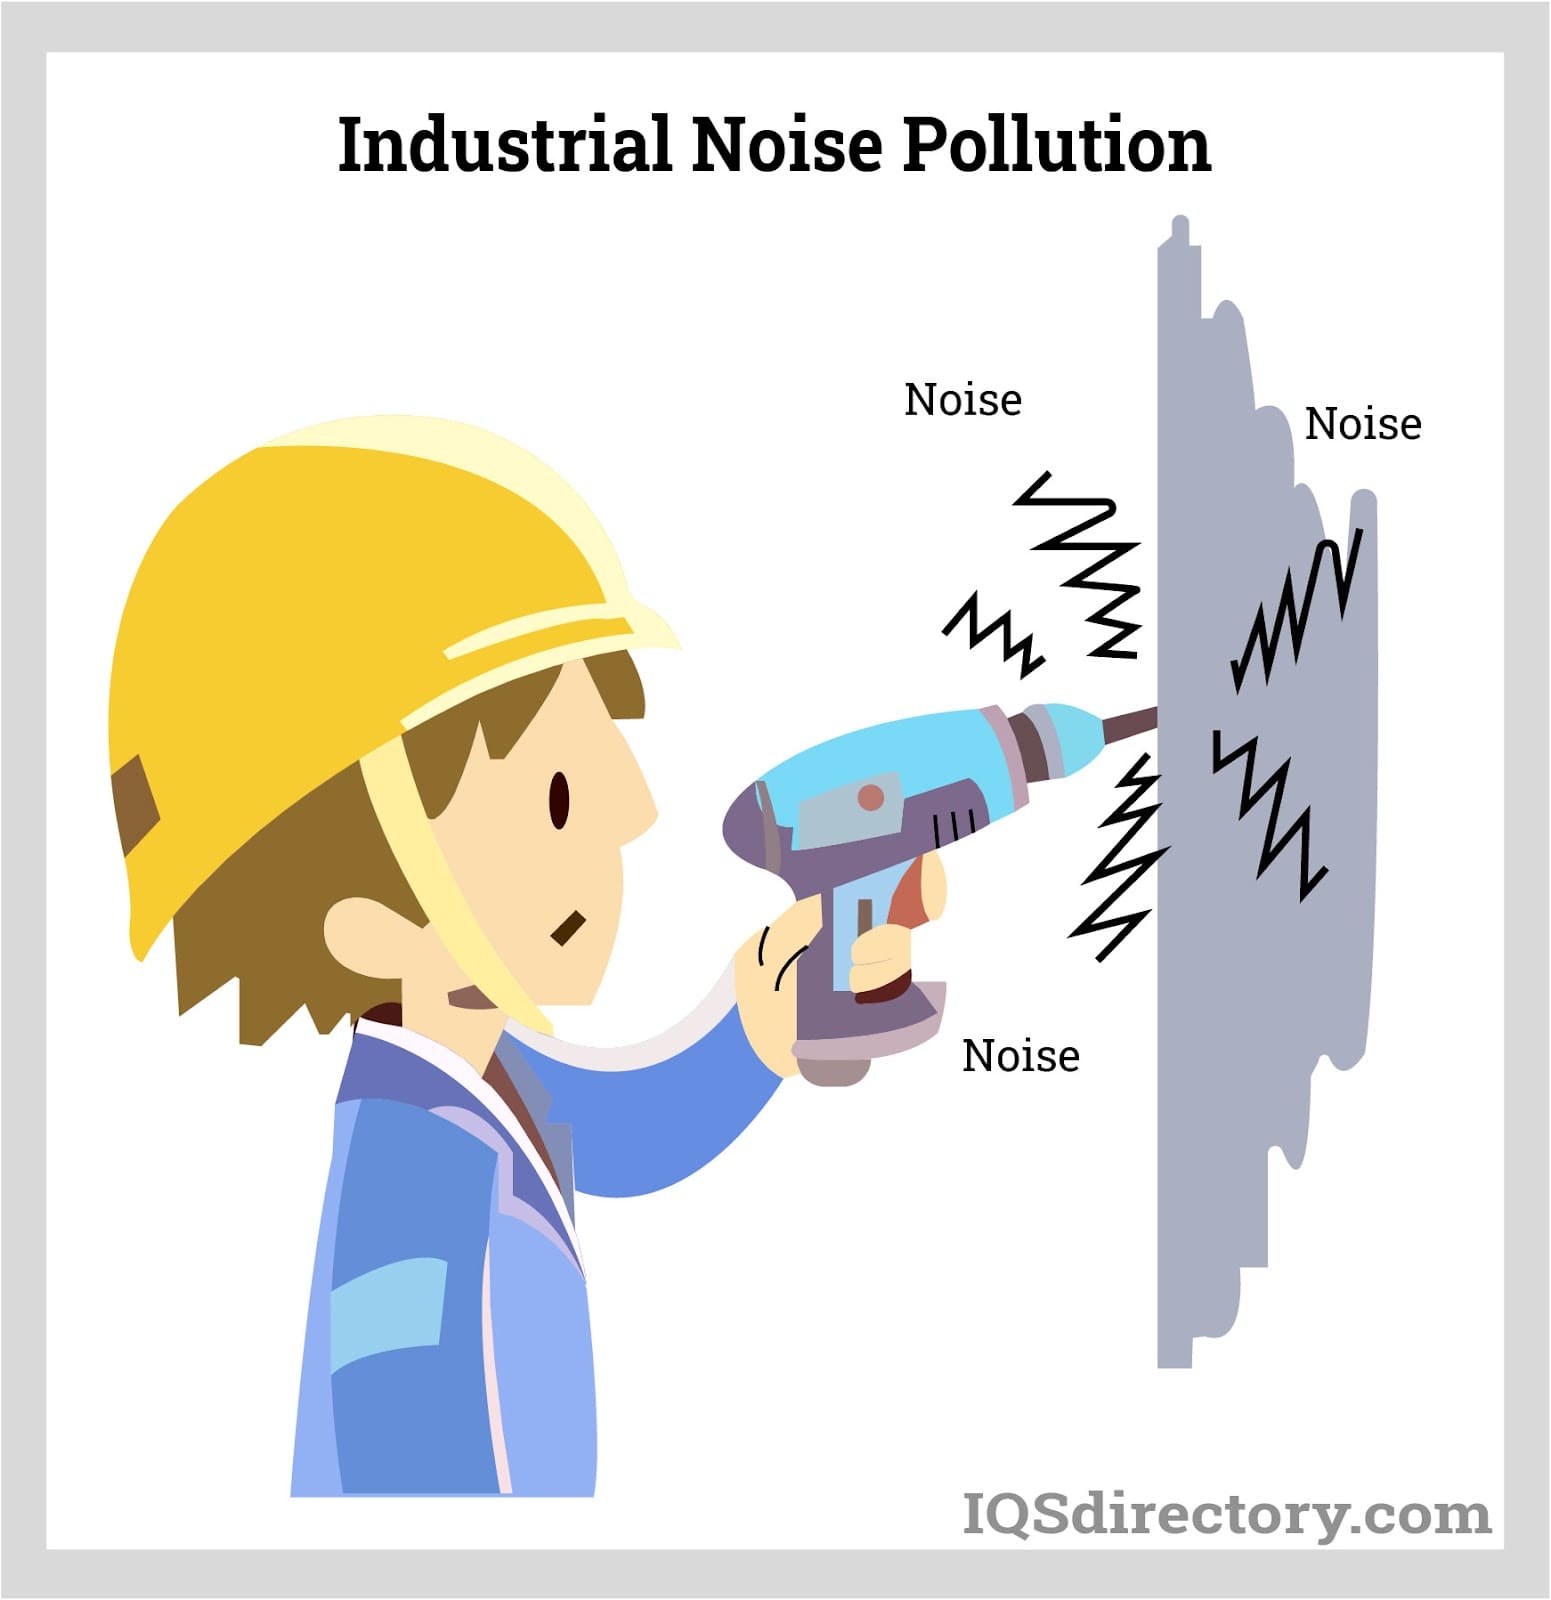  Industrial Noise Pollution